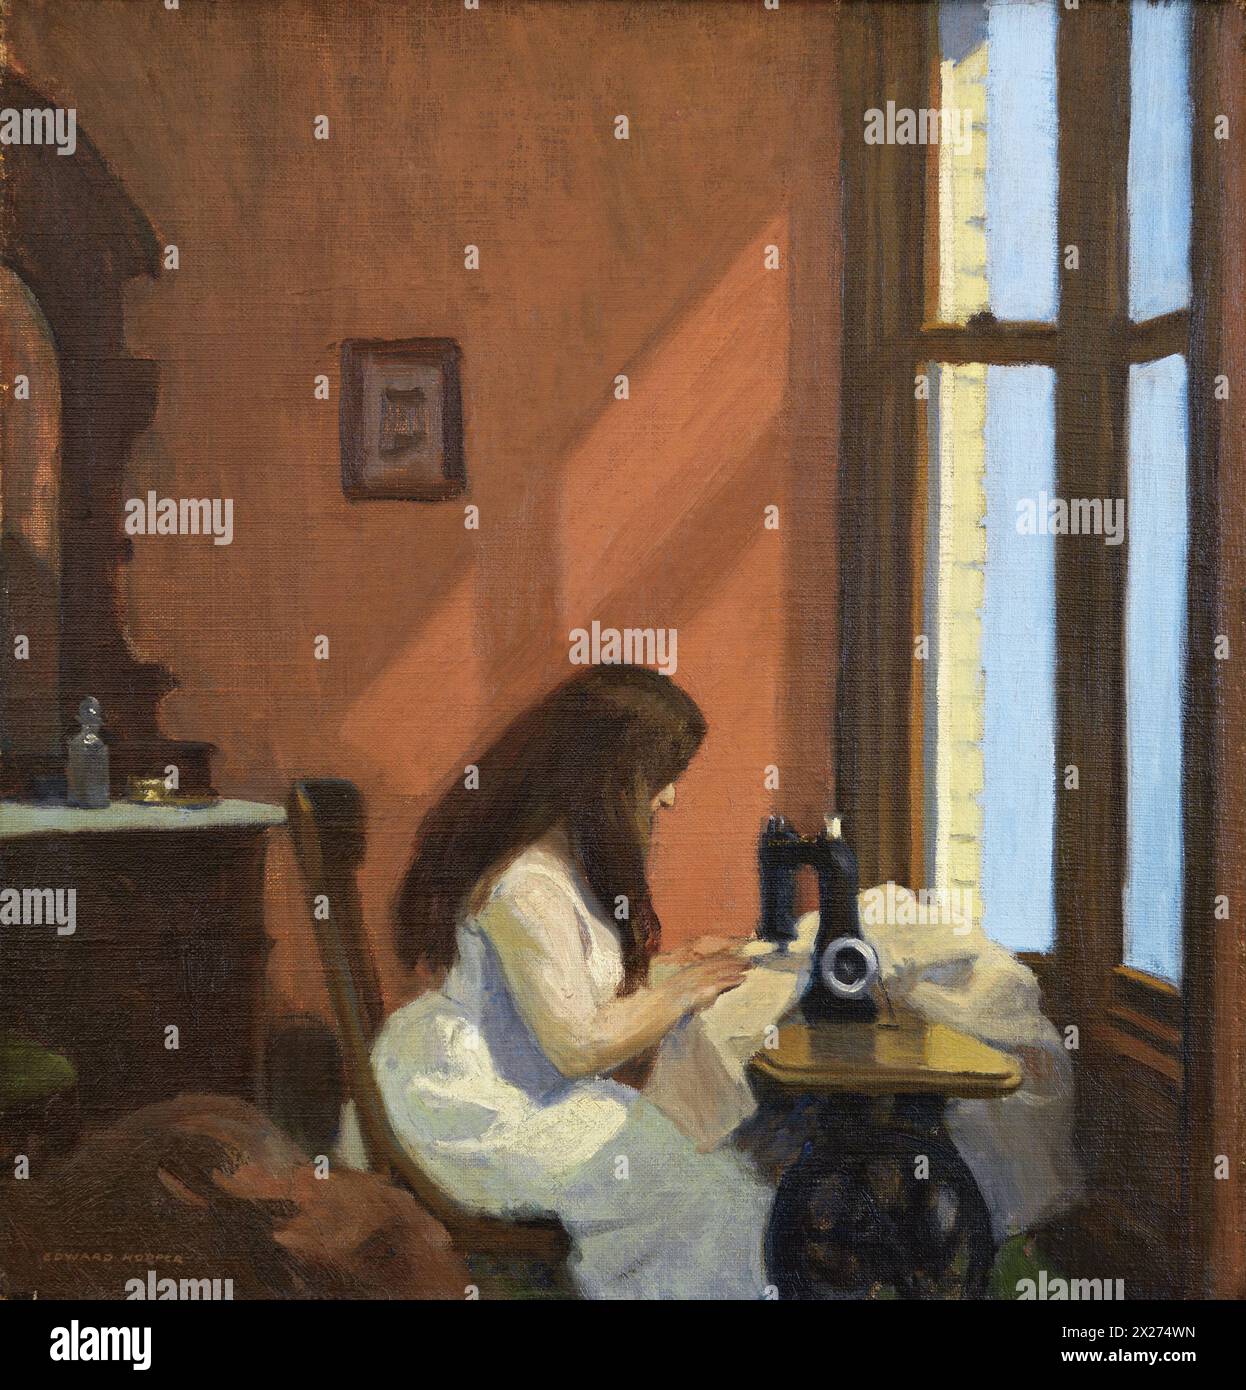 Girl at Sewing Machine is an oil-on-canvas painting by Edward Hopper, executed in 1921, now in the Thyssen-Bornemisza Museum in Madrid, Spain. Stock Photo